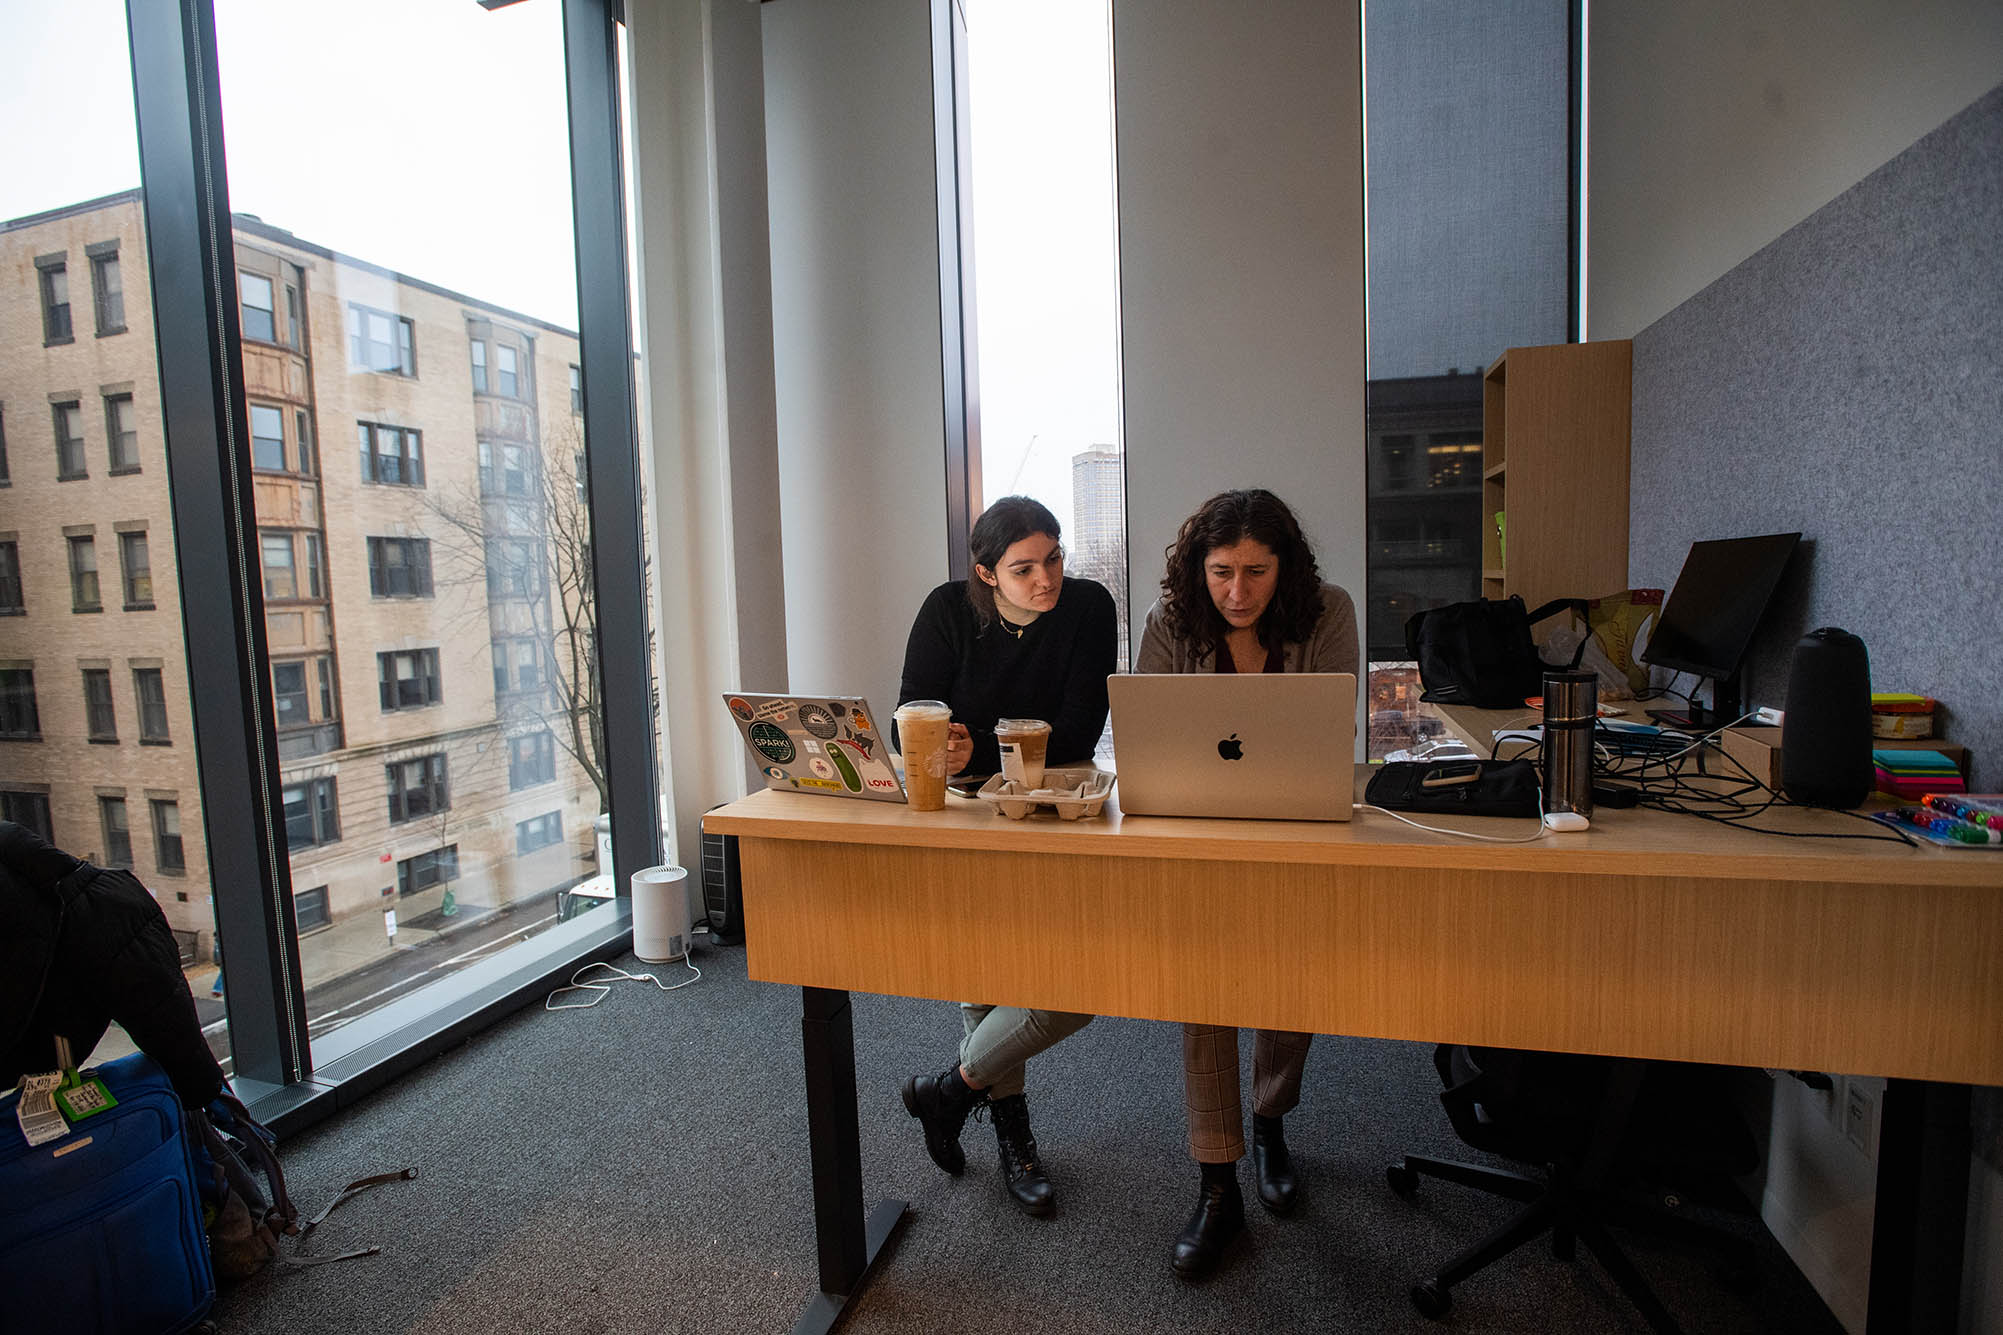 Photo: Director of BU SPARK Ziba Cramer, right, and associate program manager Savannah Majarwitz (CAS’22) attend a zoom meeting in Cramer’s new office on the second floor. Two woman sit side by side at a long wooden desk with laptops open. A large window to their left lets in a lot of sunlight.